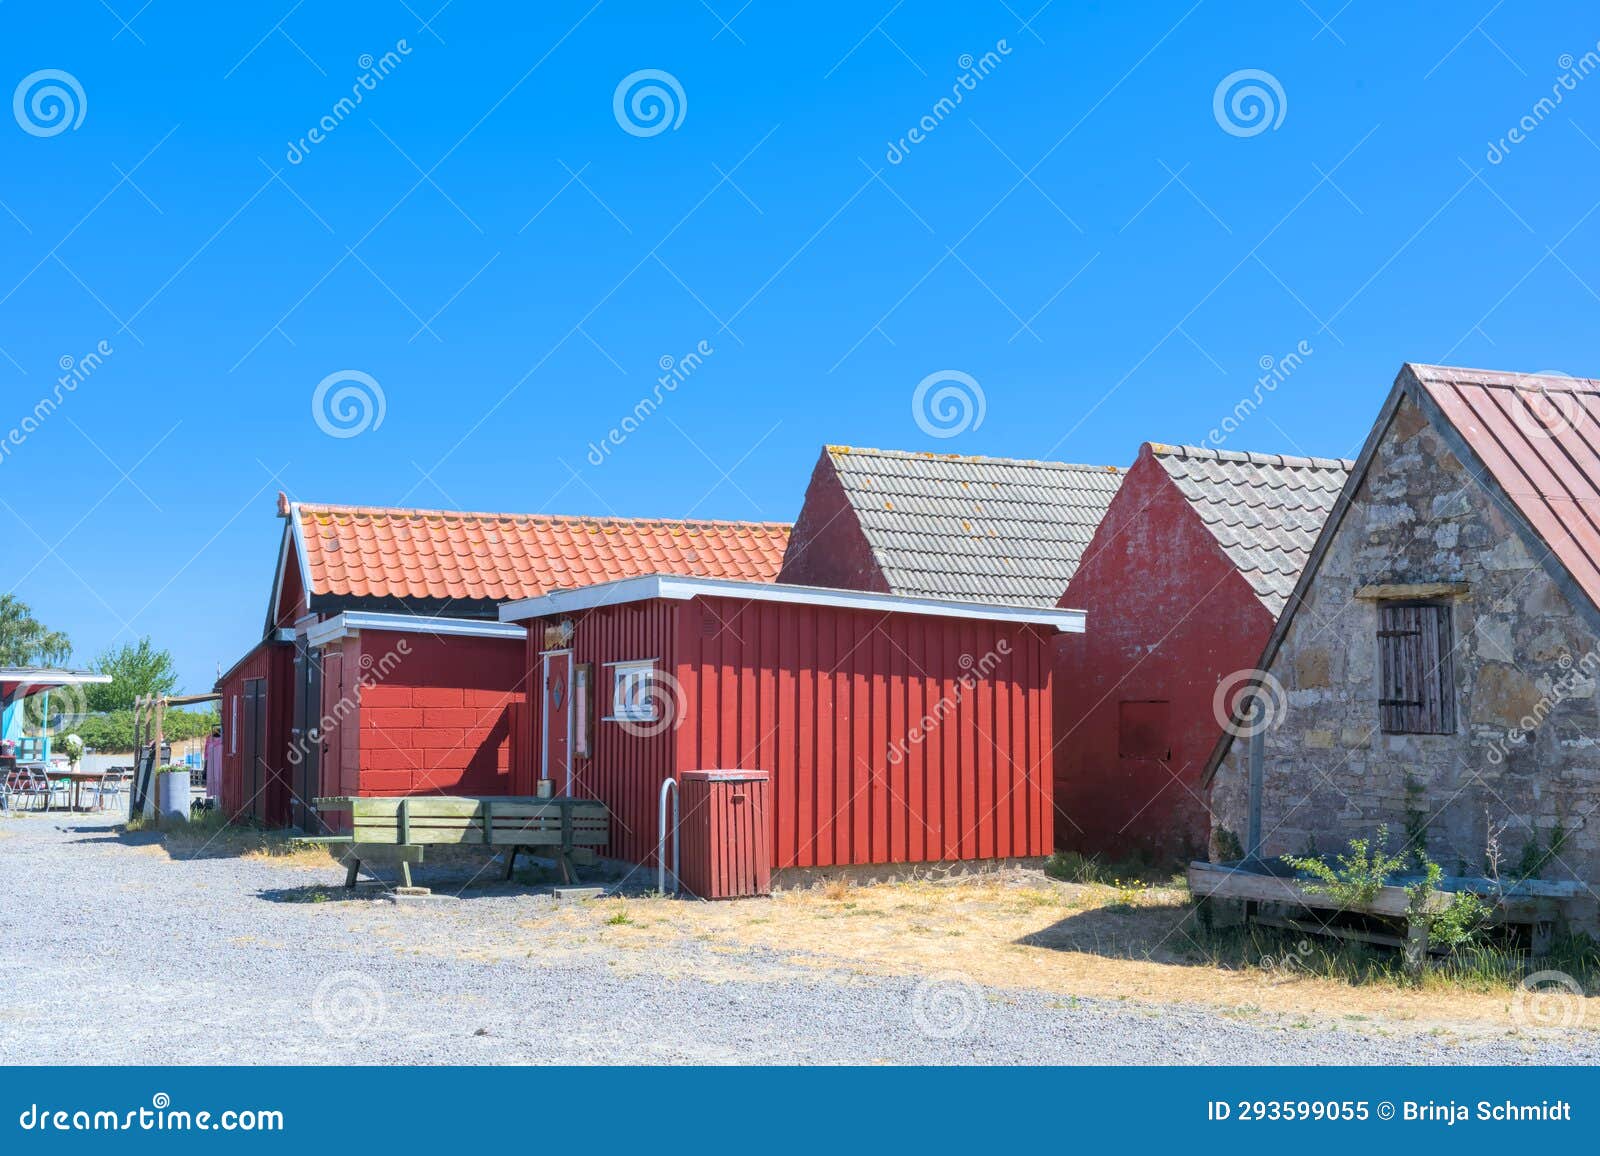 a traditional small,red,danish framehouse in summer in bornholm with blue sky